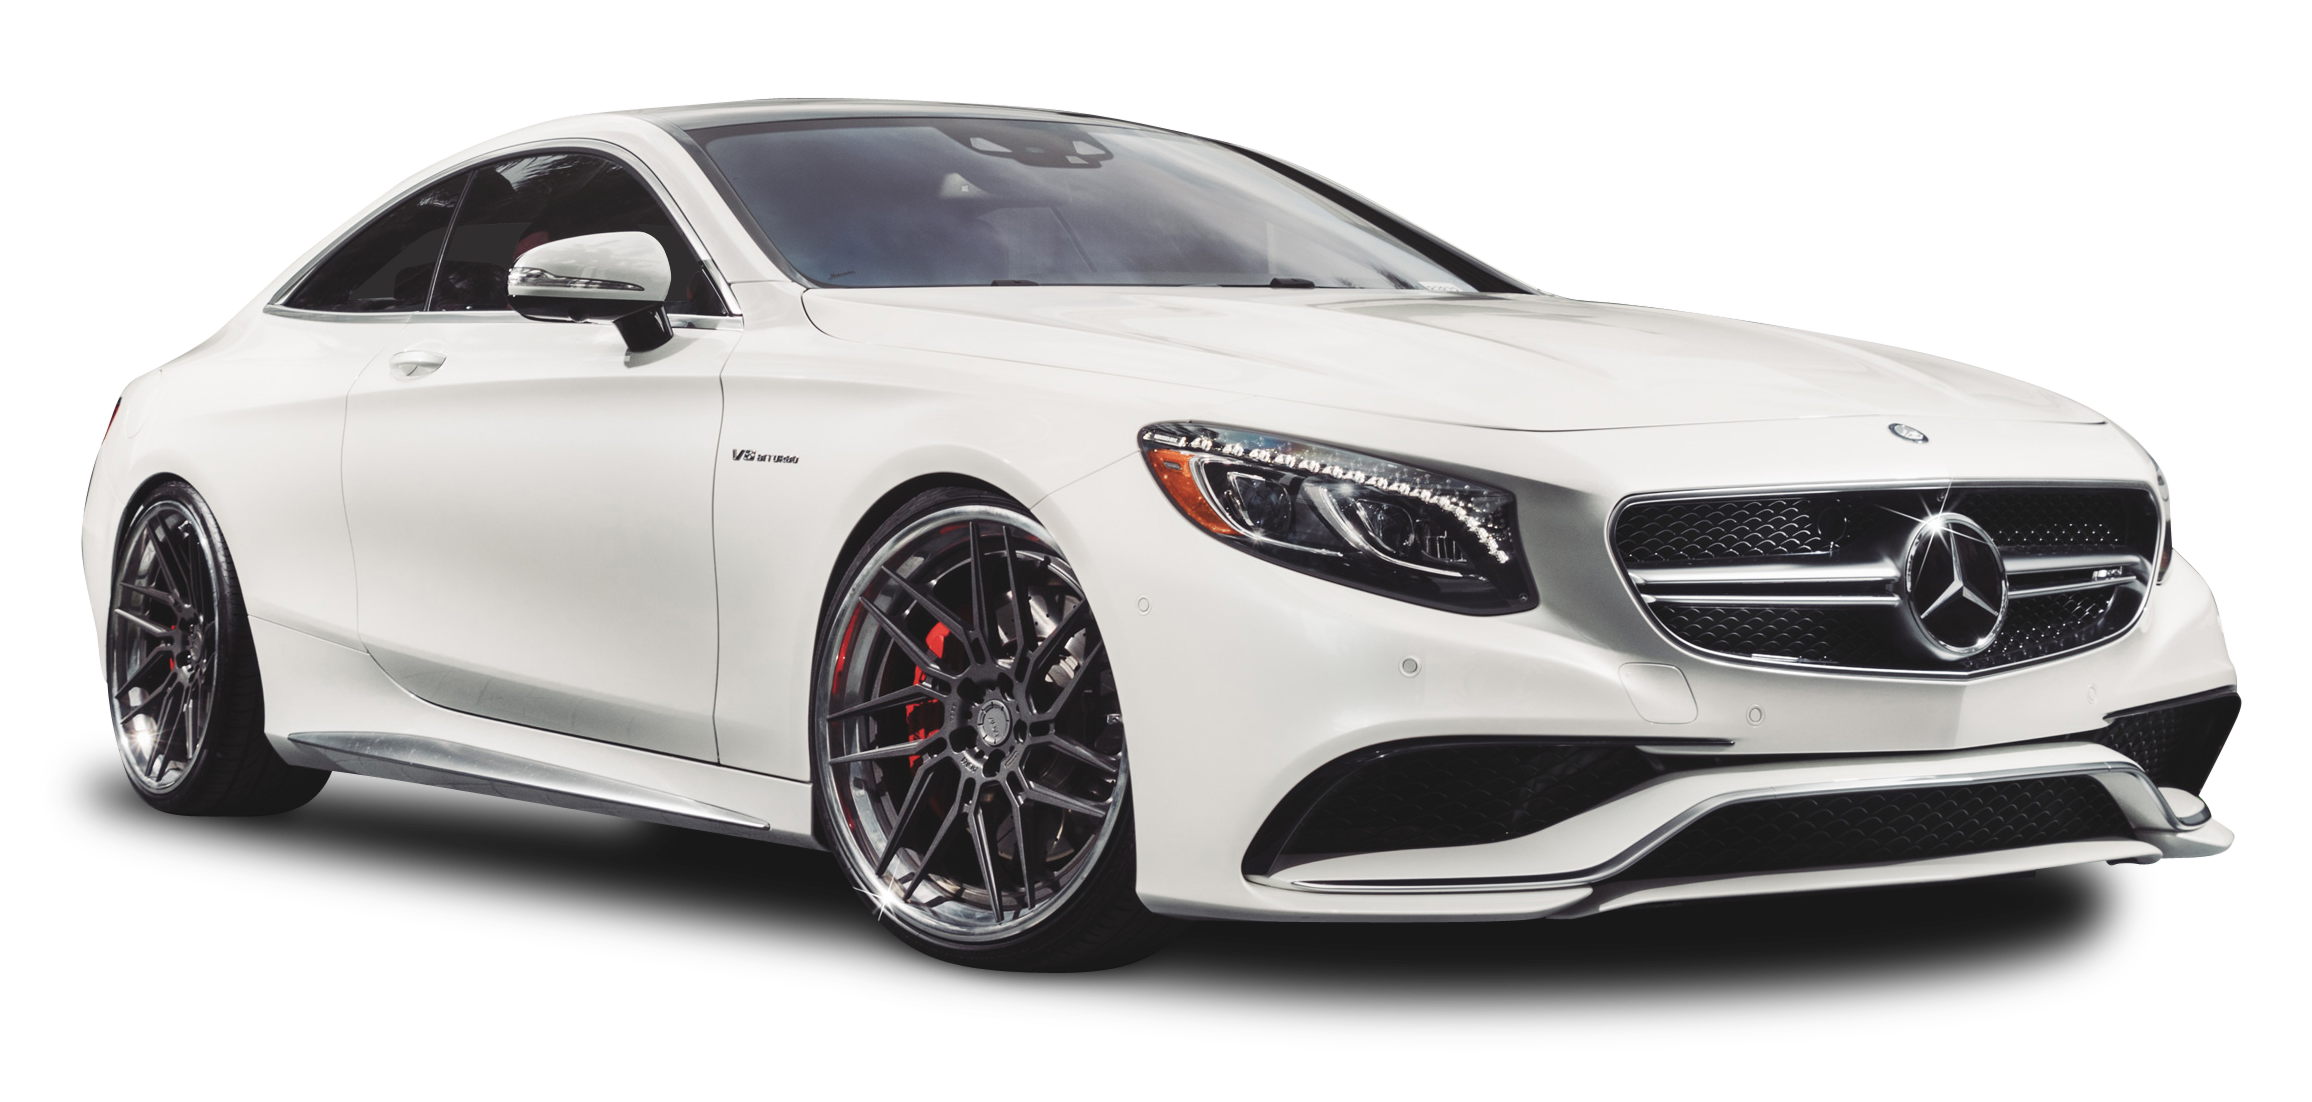 White Mercedes Benz S63 Amg Car Png Image - Mercedes, Transparent background PNG HD thumbnail